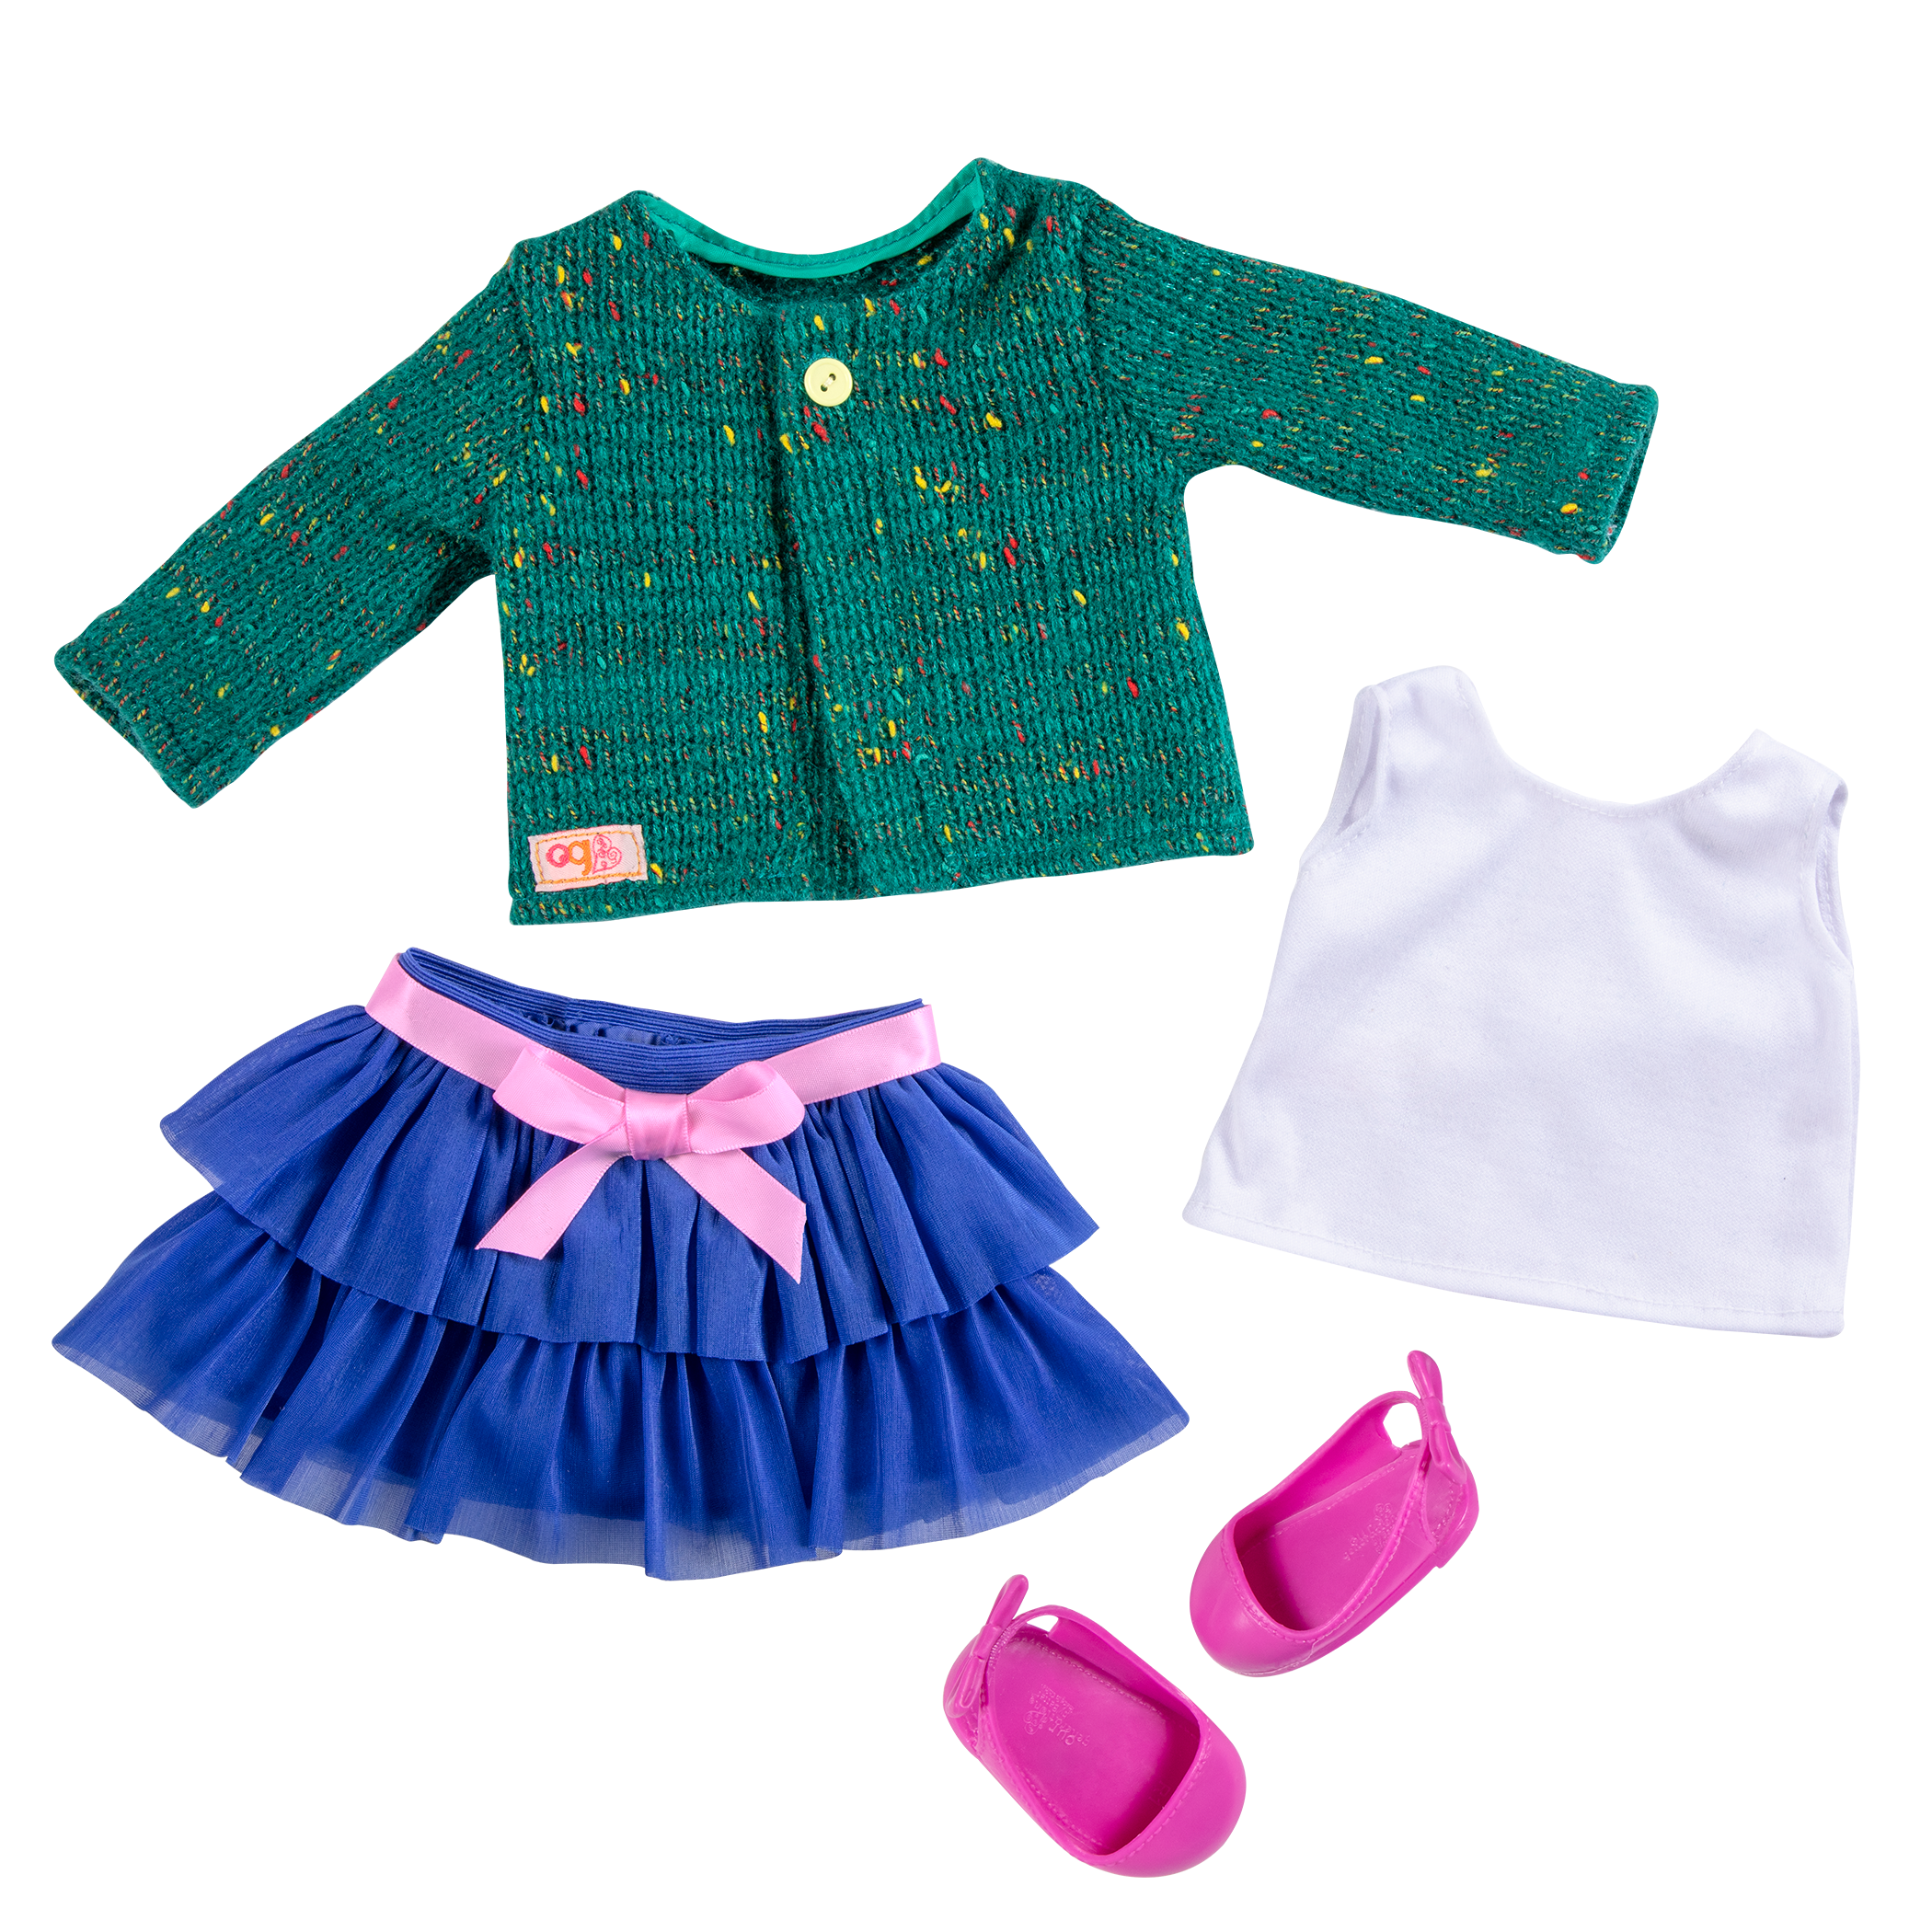 Cardigan and ruffle skirt for 18-inch doll